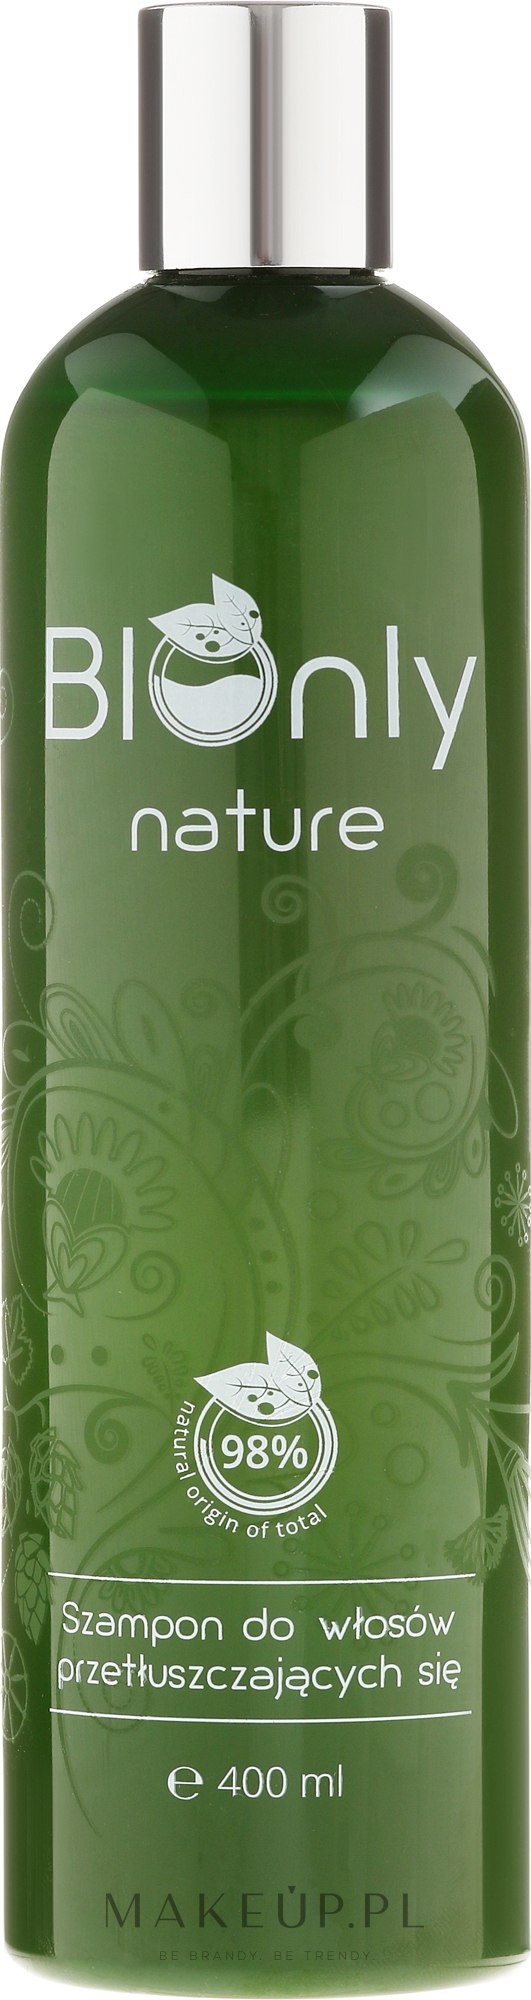 bioonly nature szampon opinie